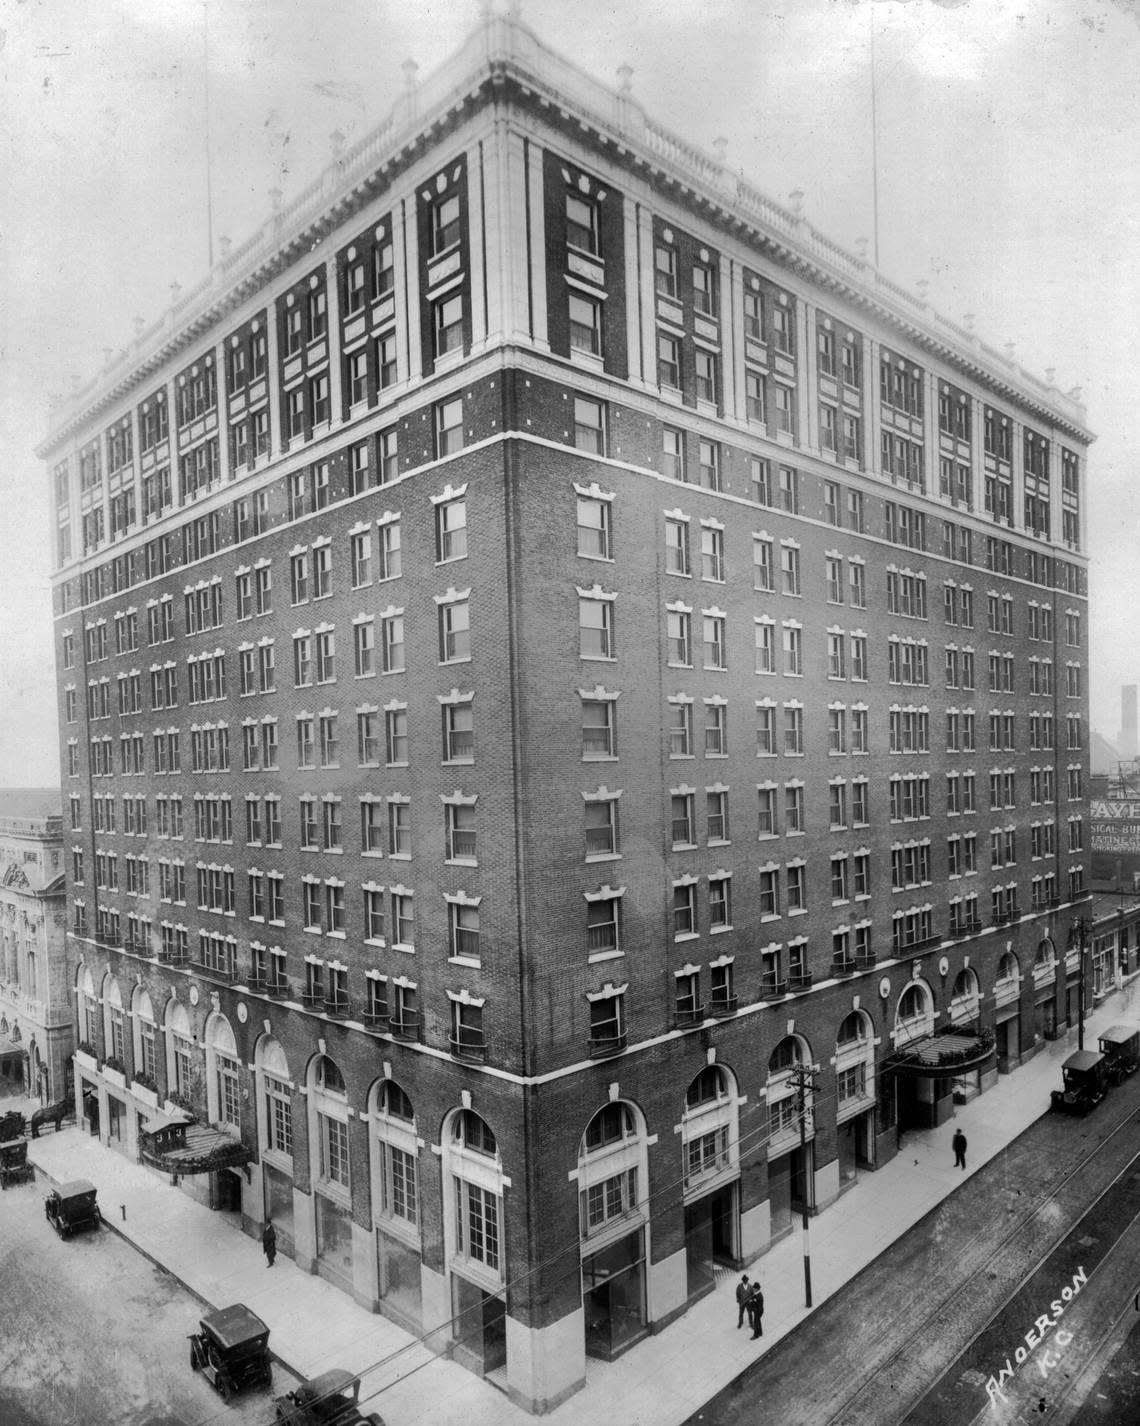 The Hotel Muehlebach at 12th Street and Baltimore Avenue.